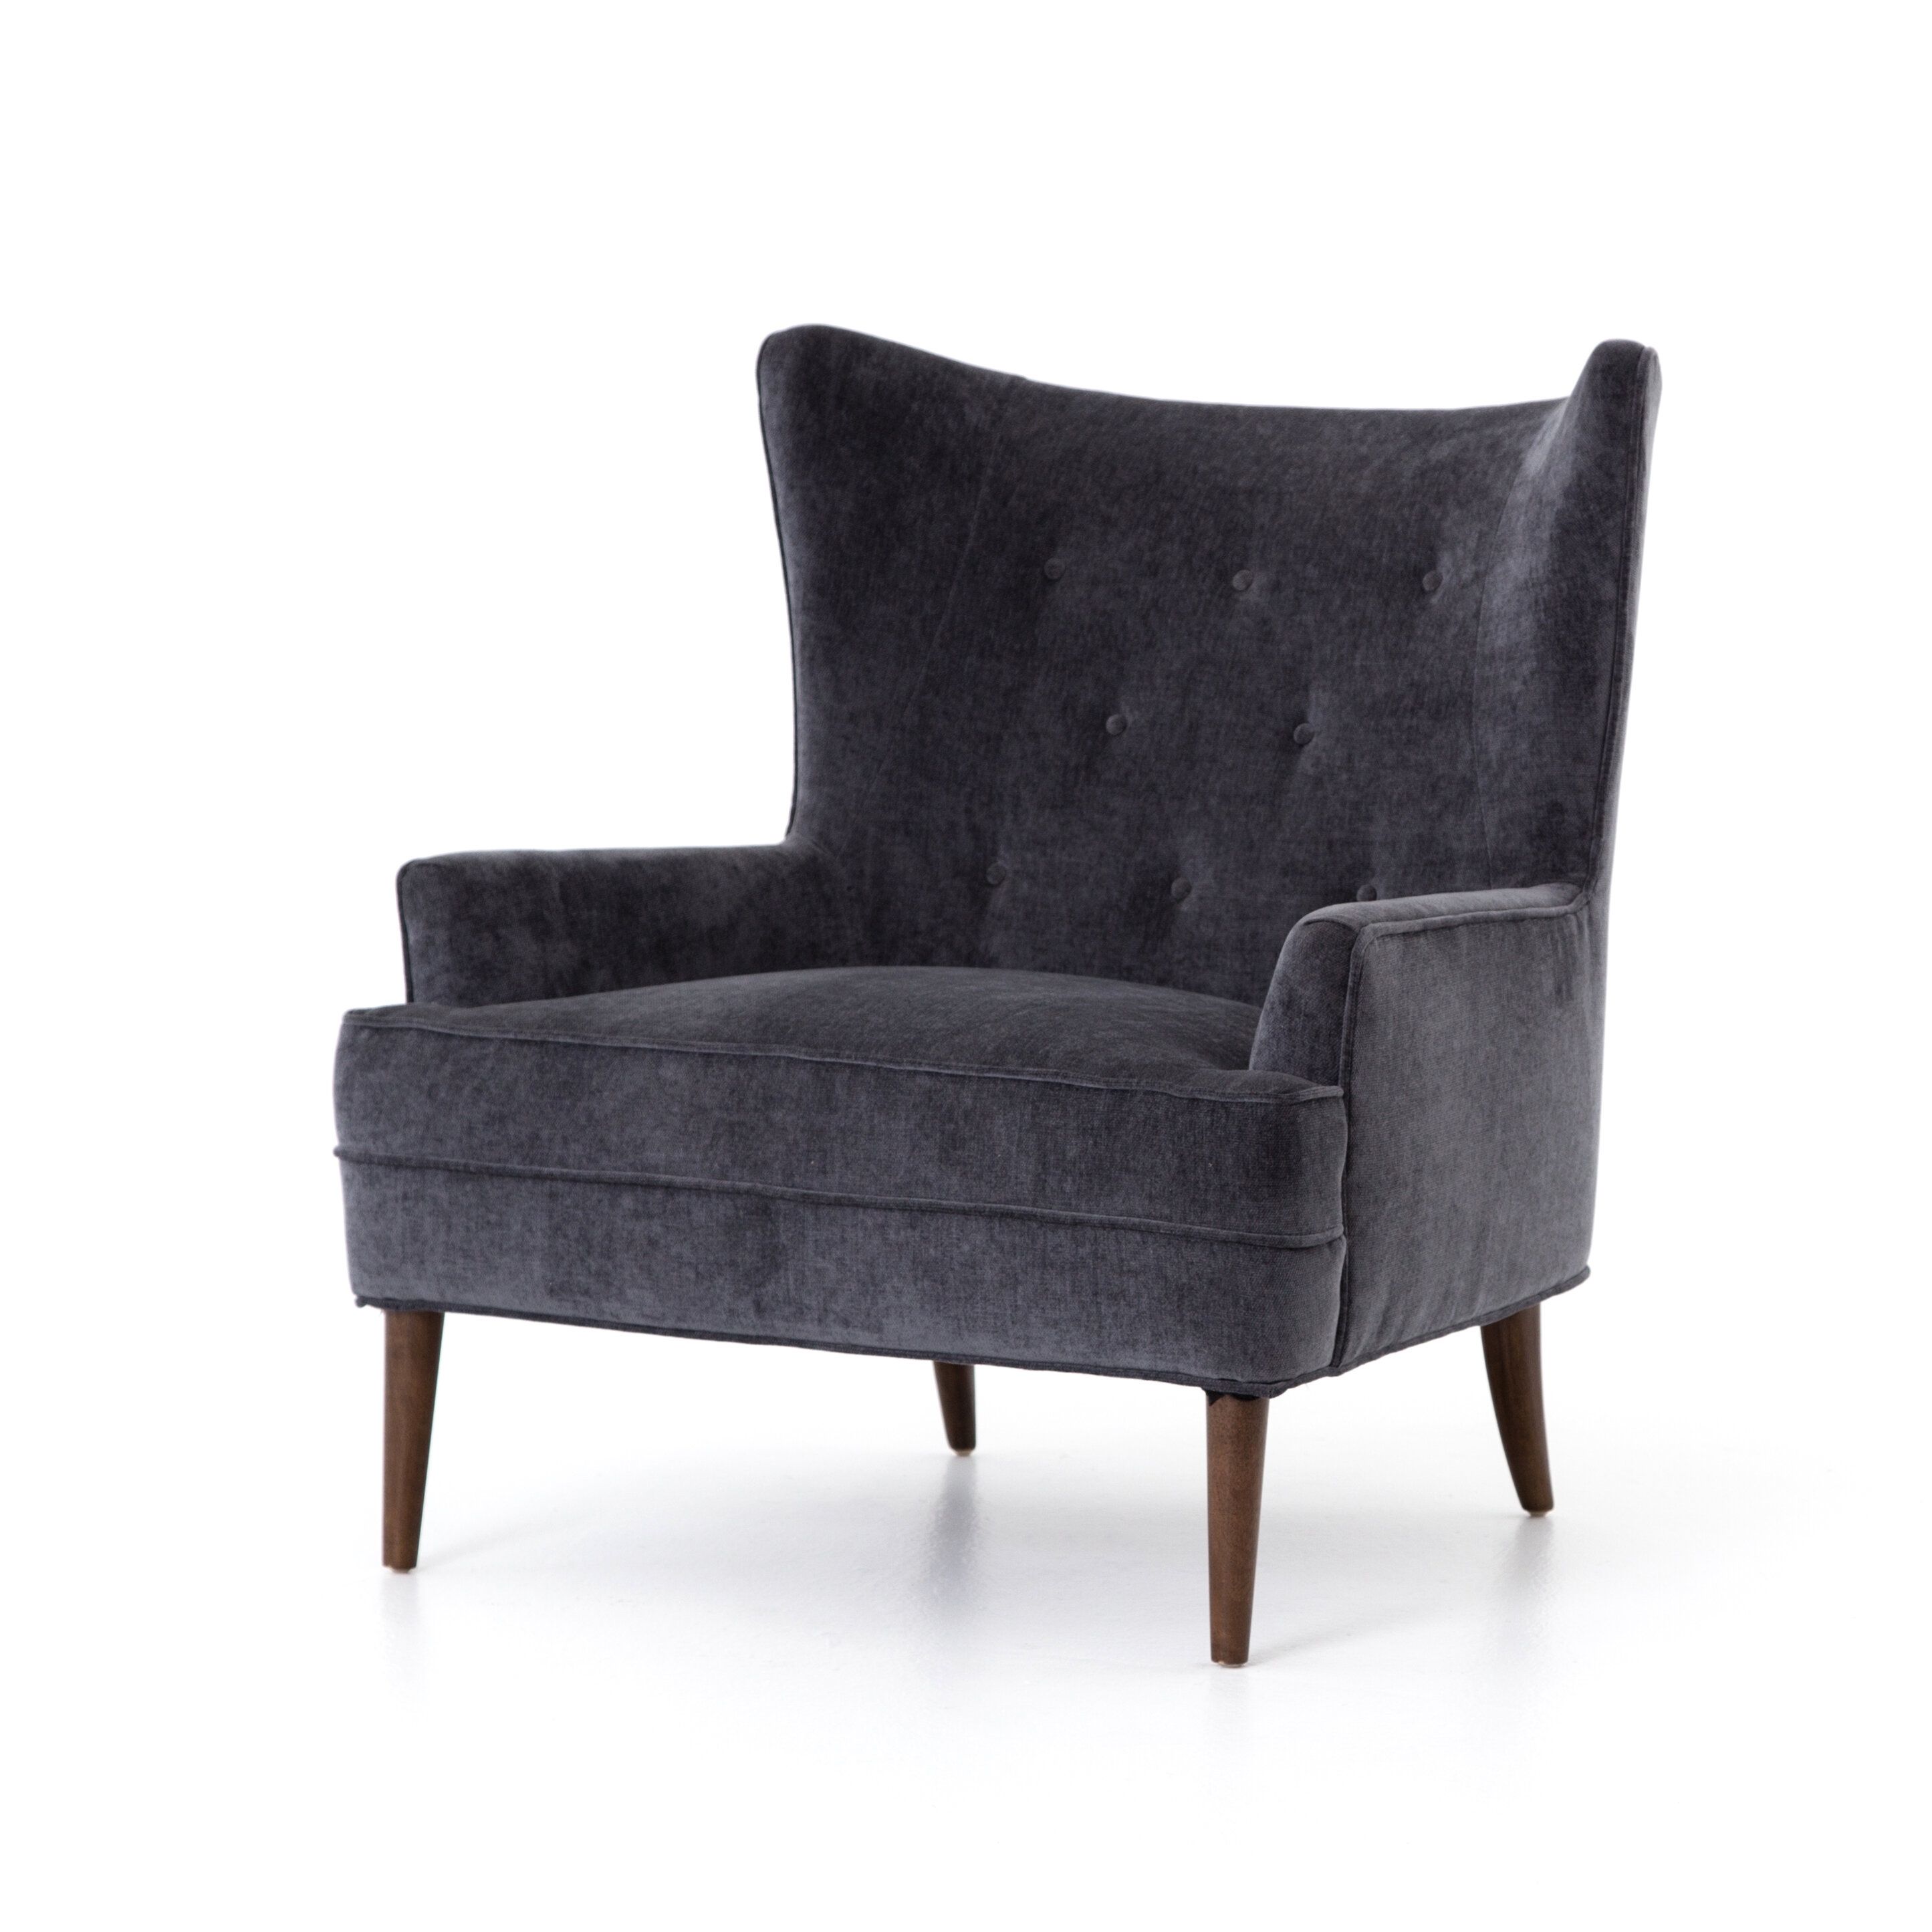 Ailis Upholstered Wingback Chair